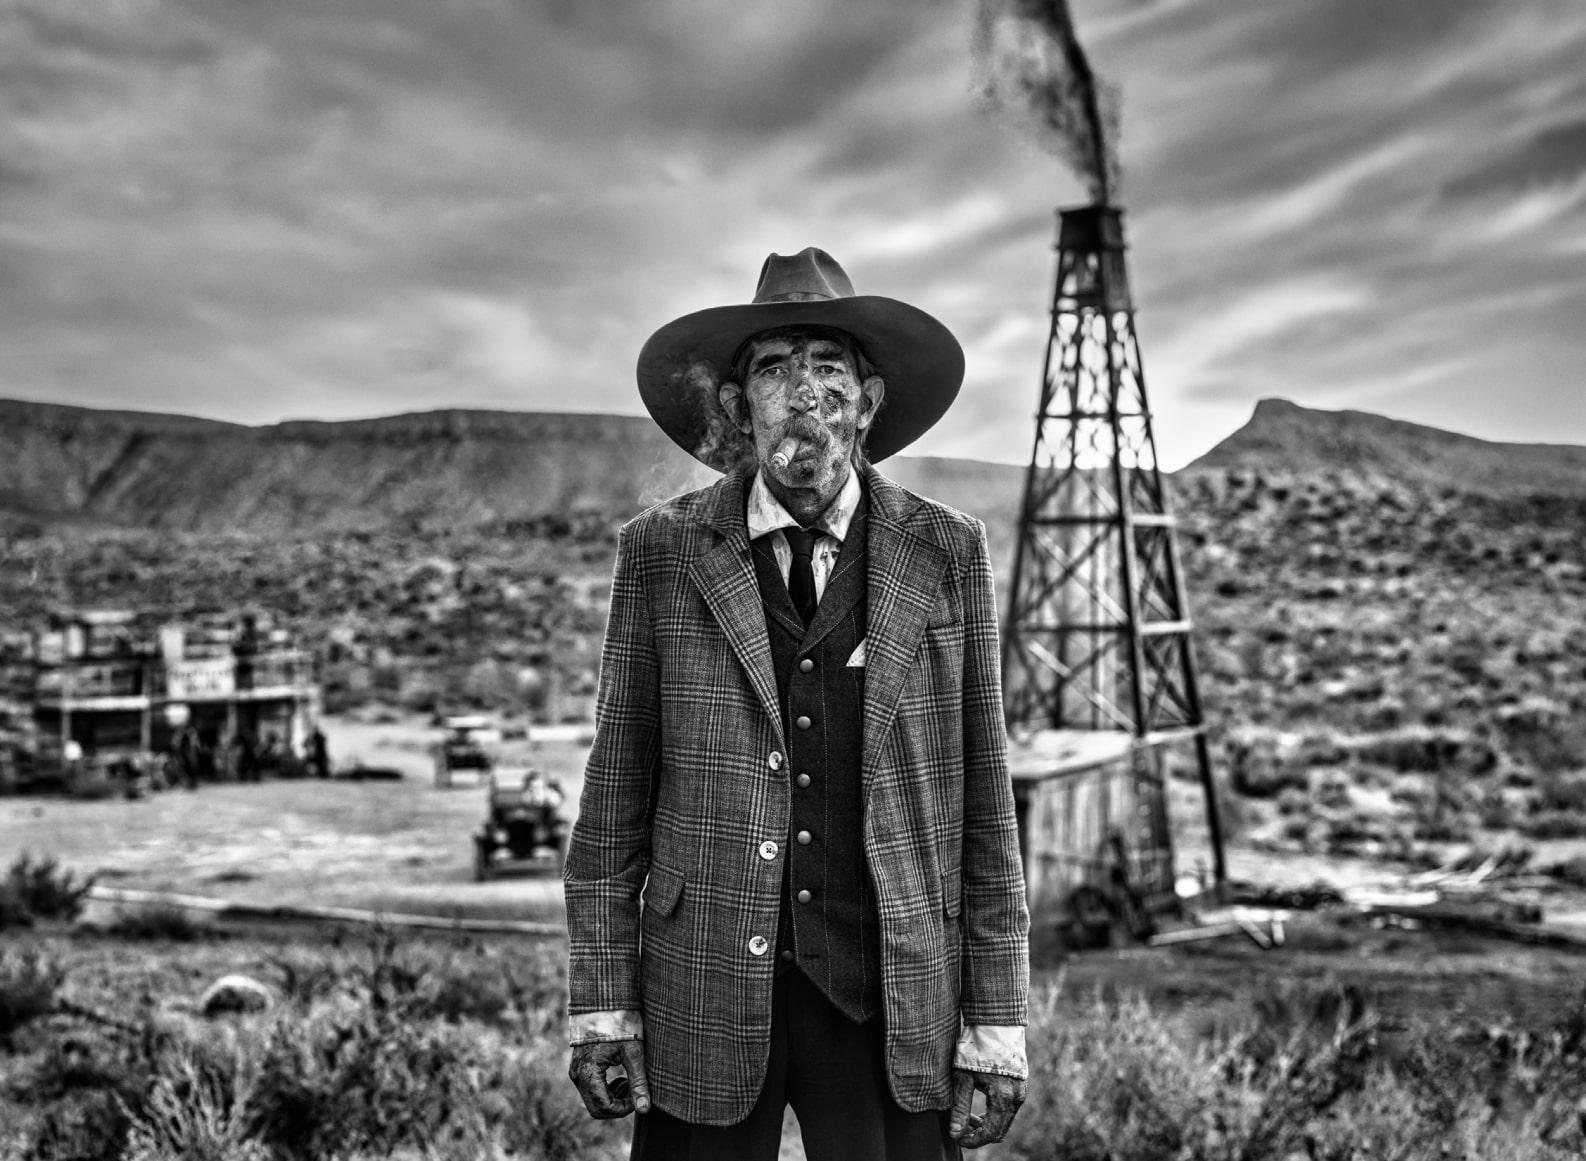 David Yarrow Black and White Photograph - 'I'm an Oil Man' - Old Man in front of Oil derrick, fine art photography, 2023